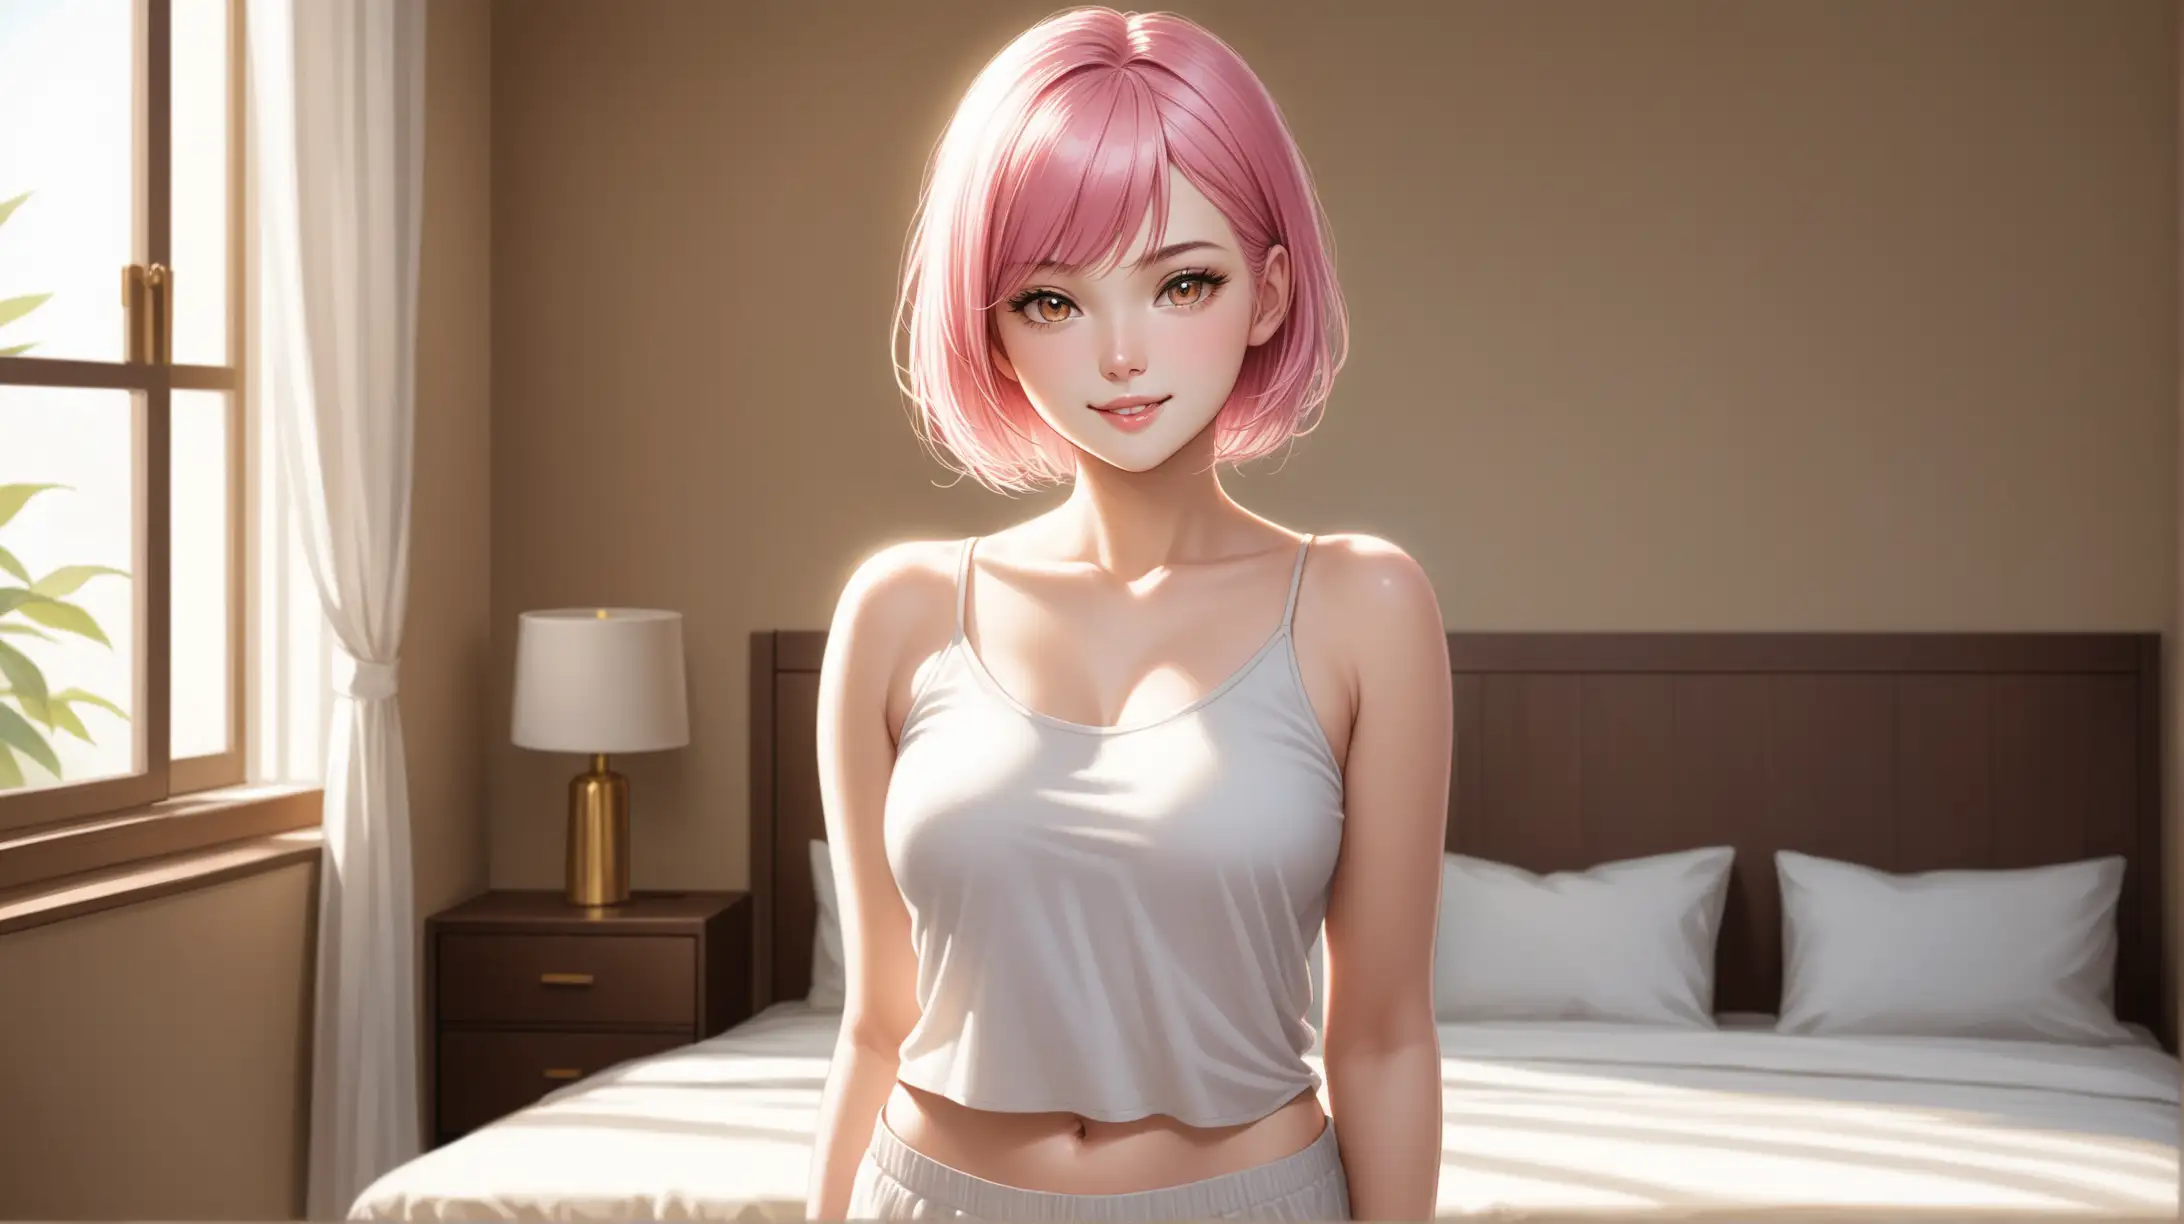 Draw a woman, short pink hair, gold ringed eyes, slender figure, high quality, realistic, accurate, detailed, long shot, indoors, bedroom, natural lighting, casual outfit, seductive pose, smiling toward viewer